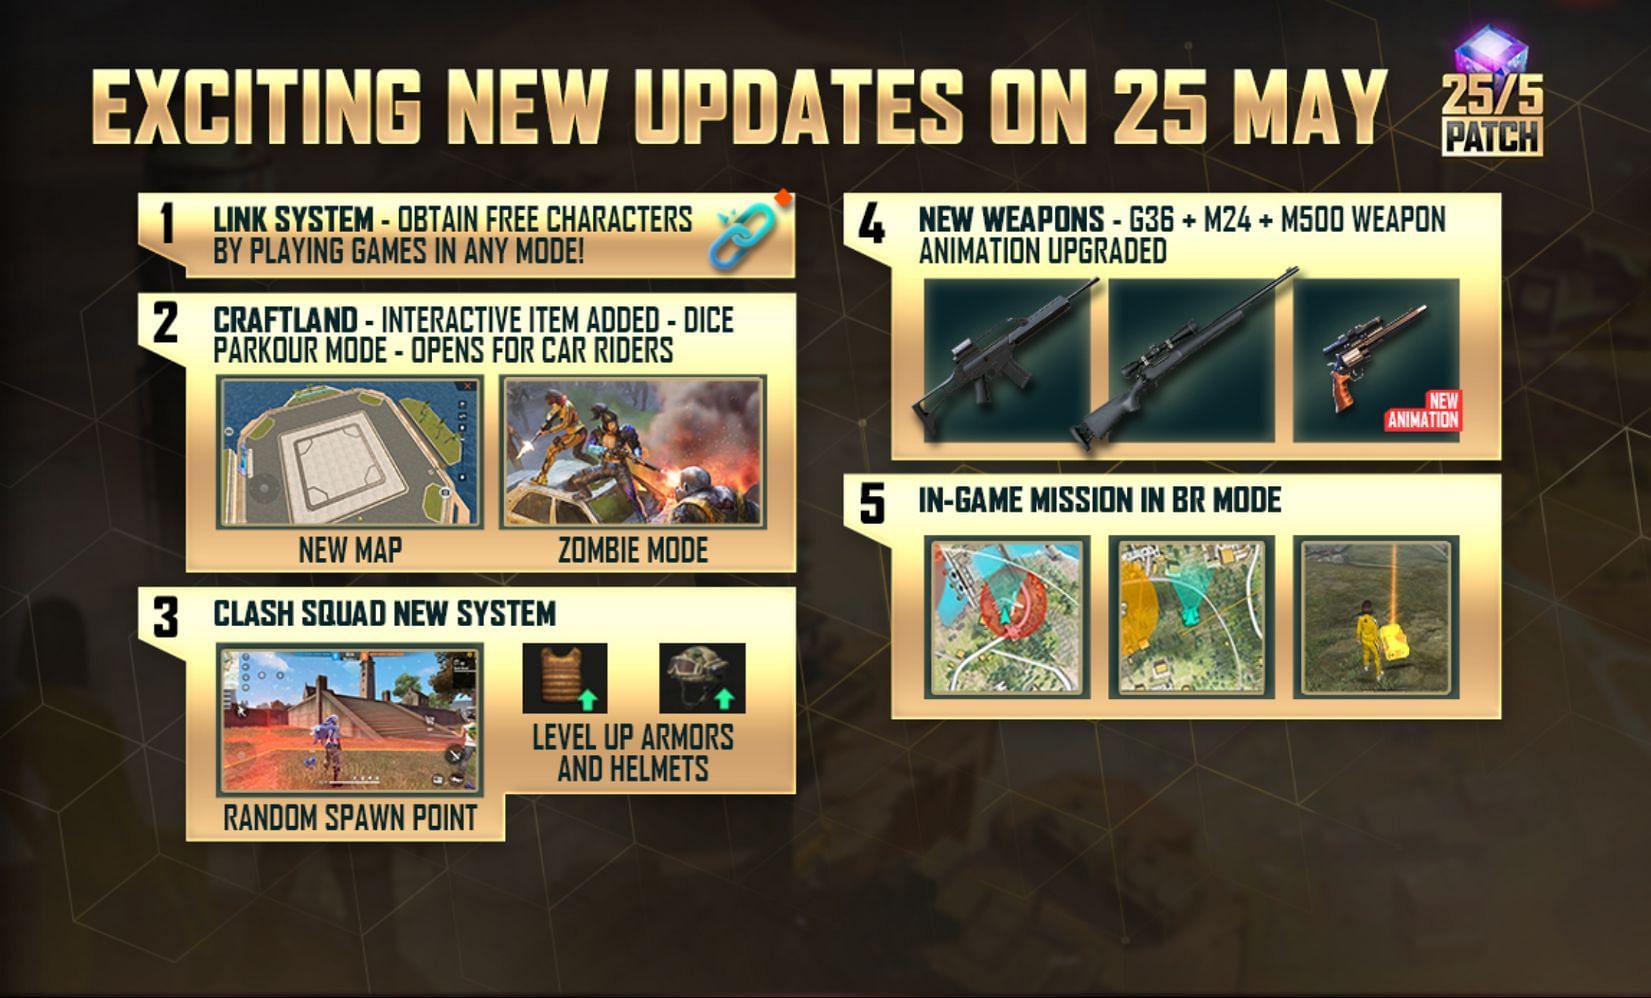 The patch drops on 25 May (Image via Garena)